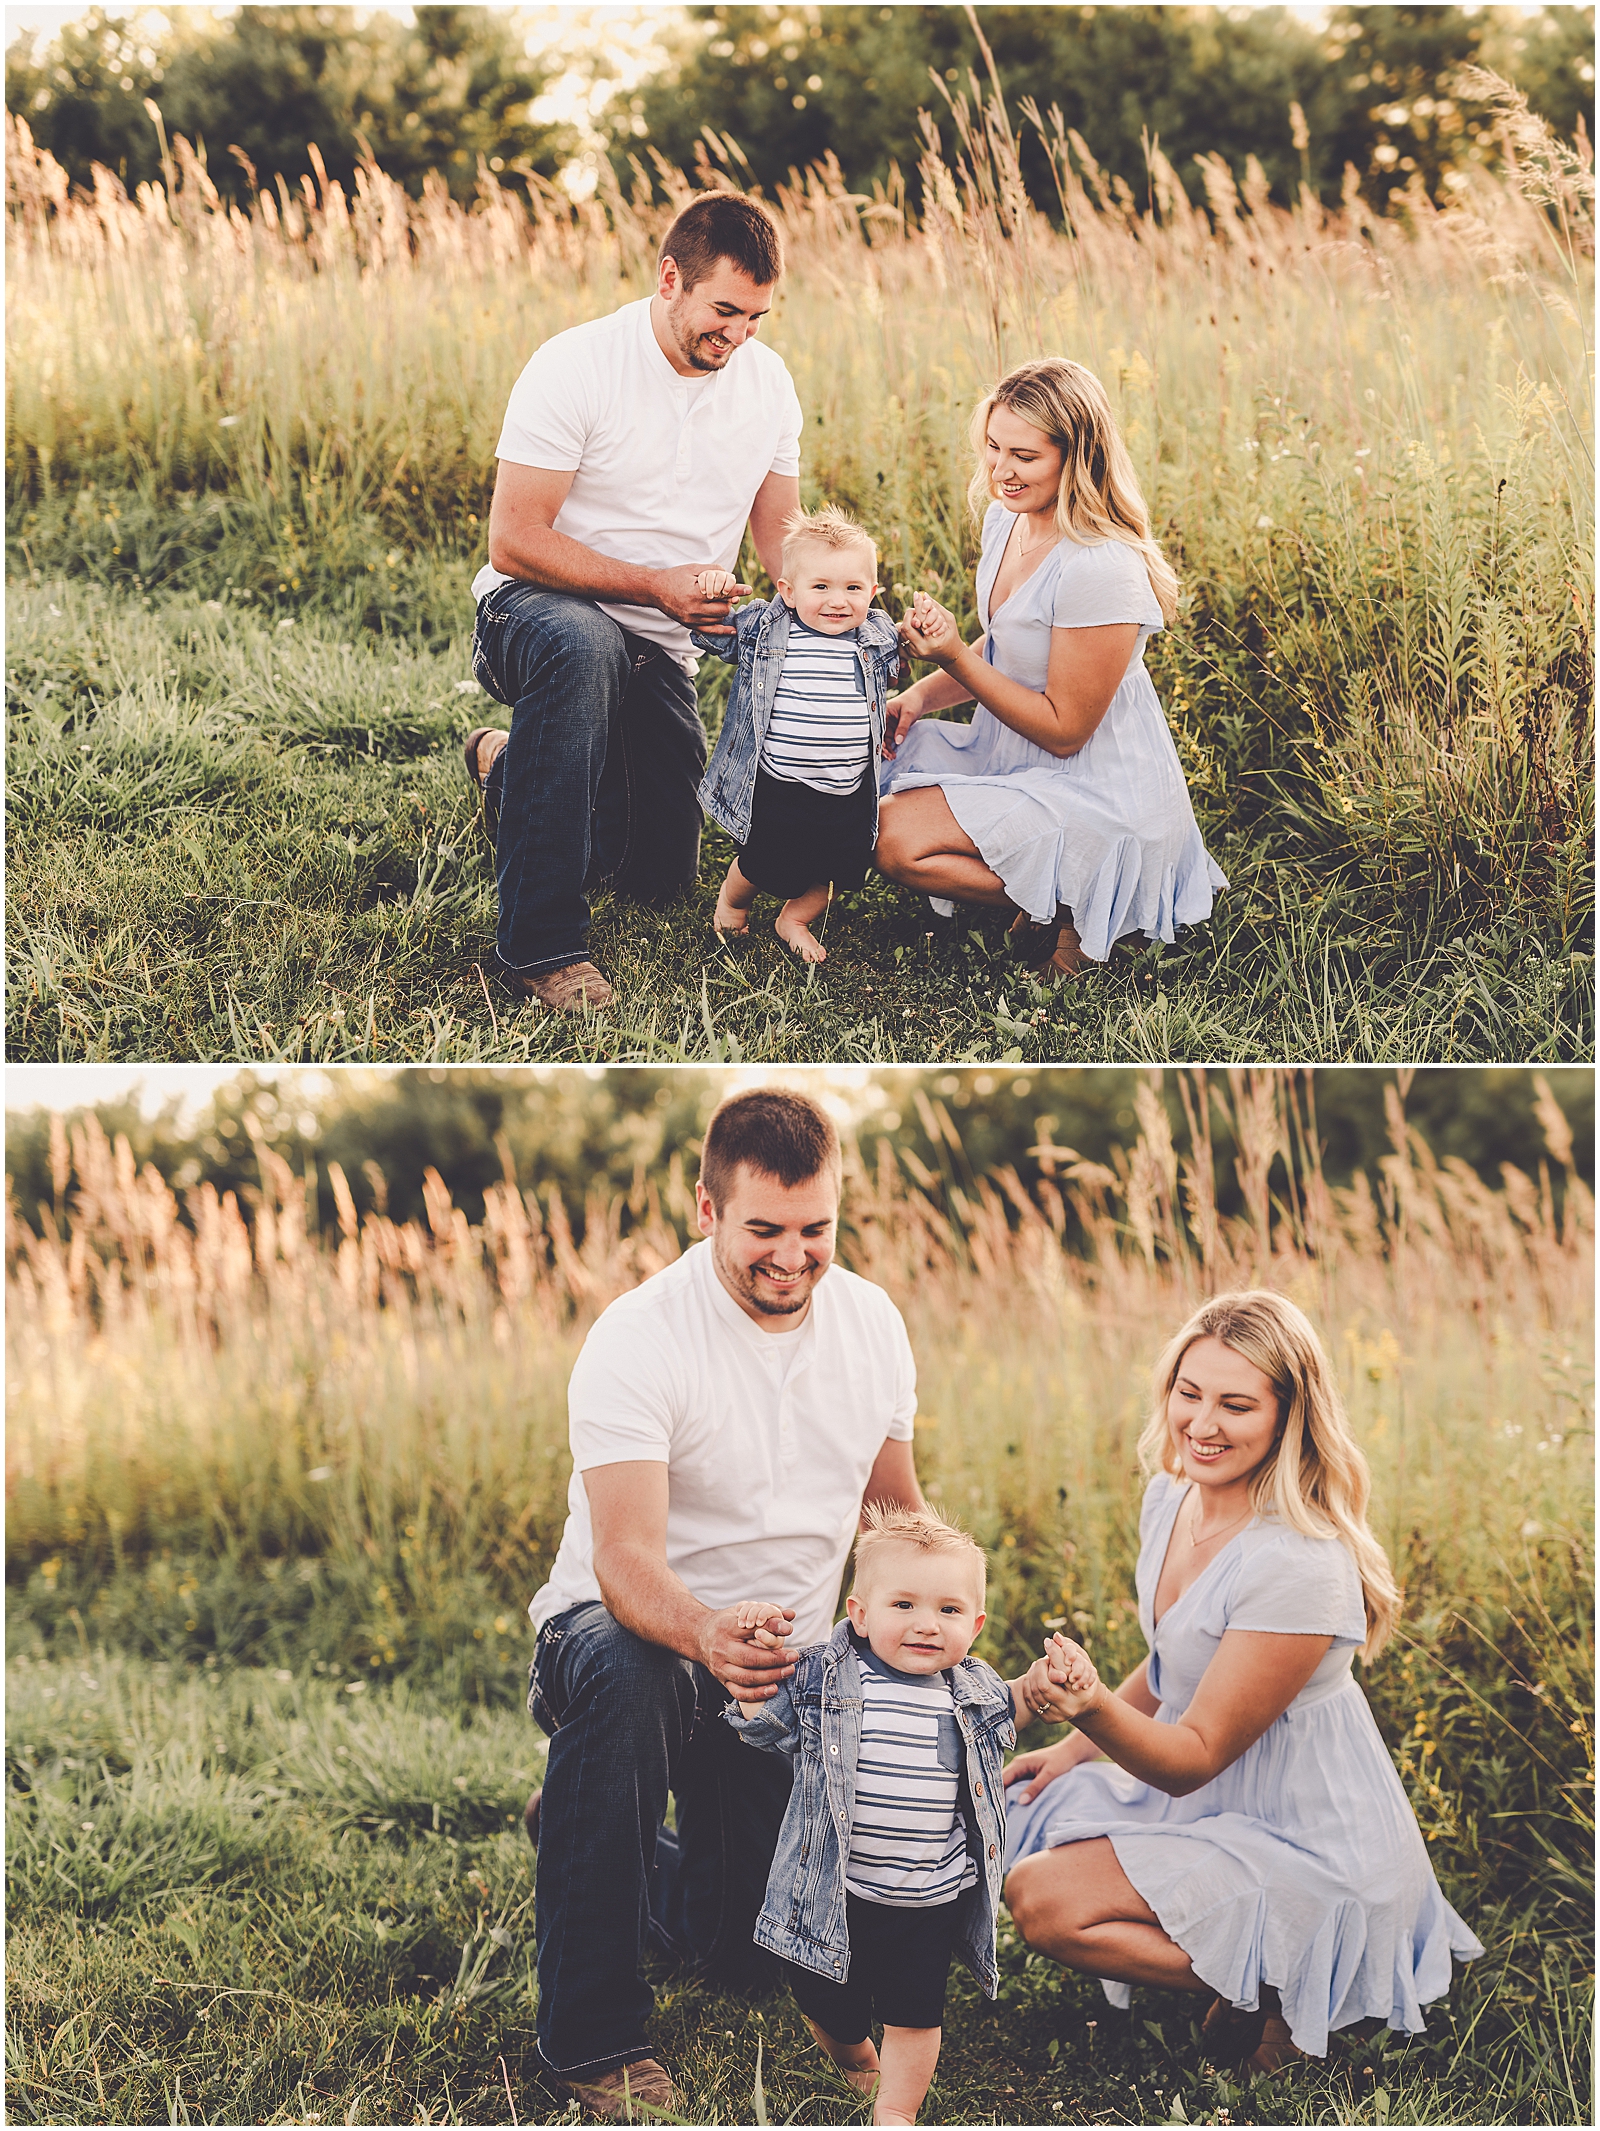 Iroquois County sunset family photographer for the Balthazor family with Bourbonnais family photographer Kara Evans Photographer.